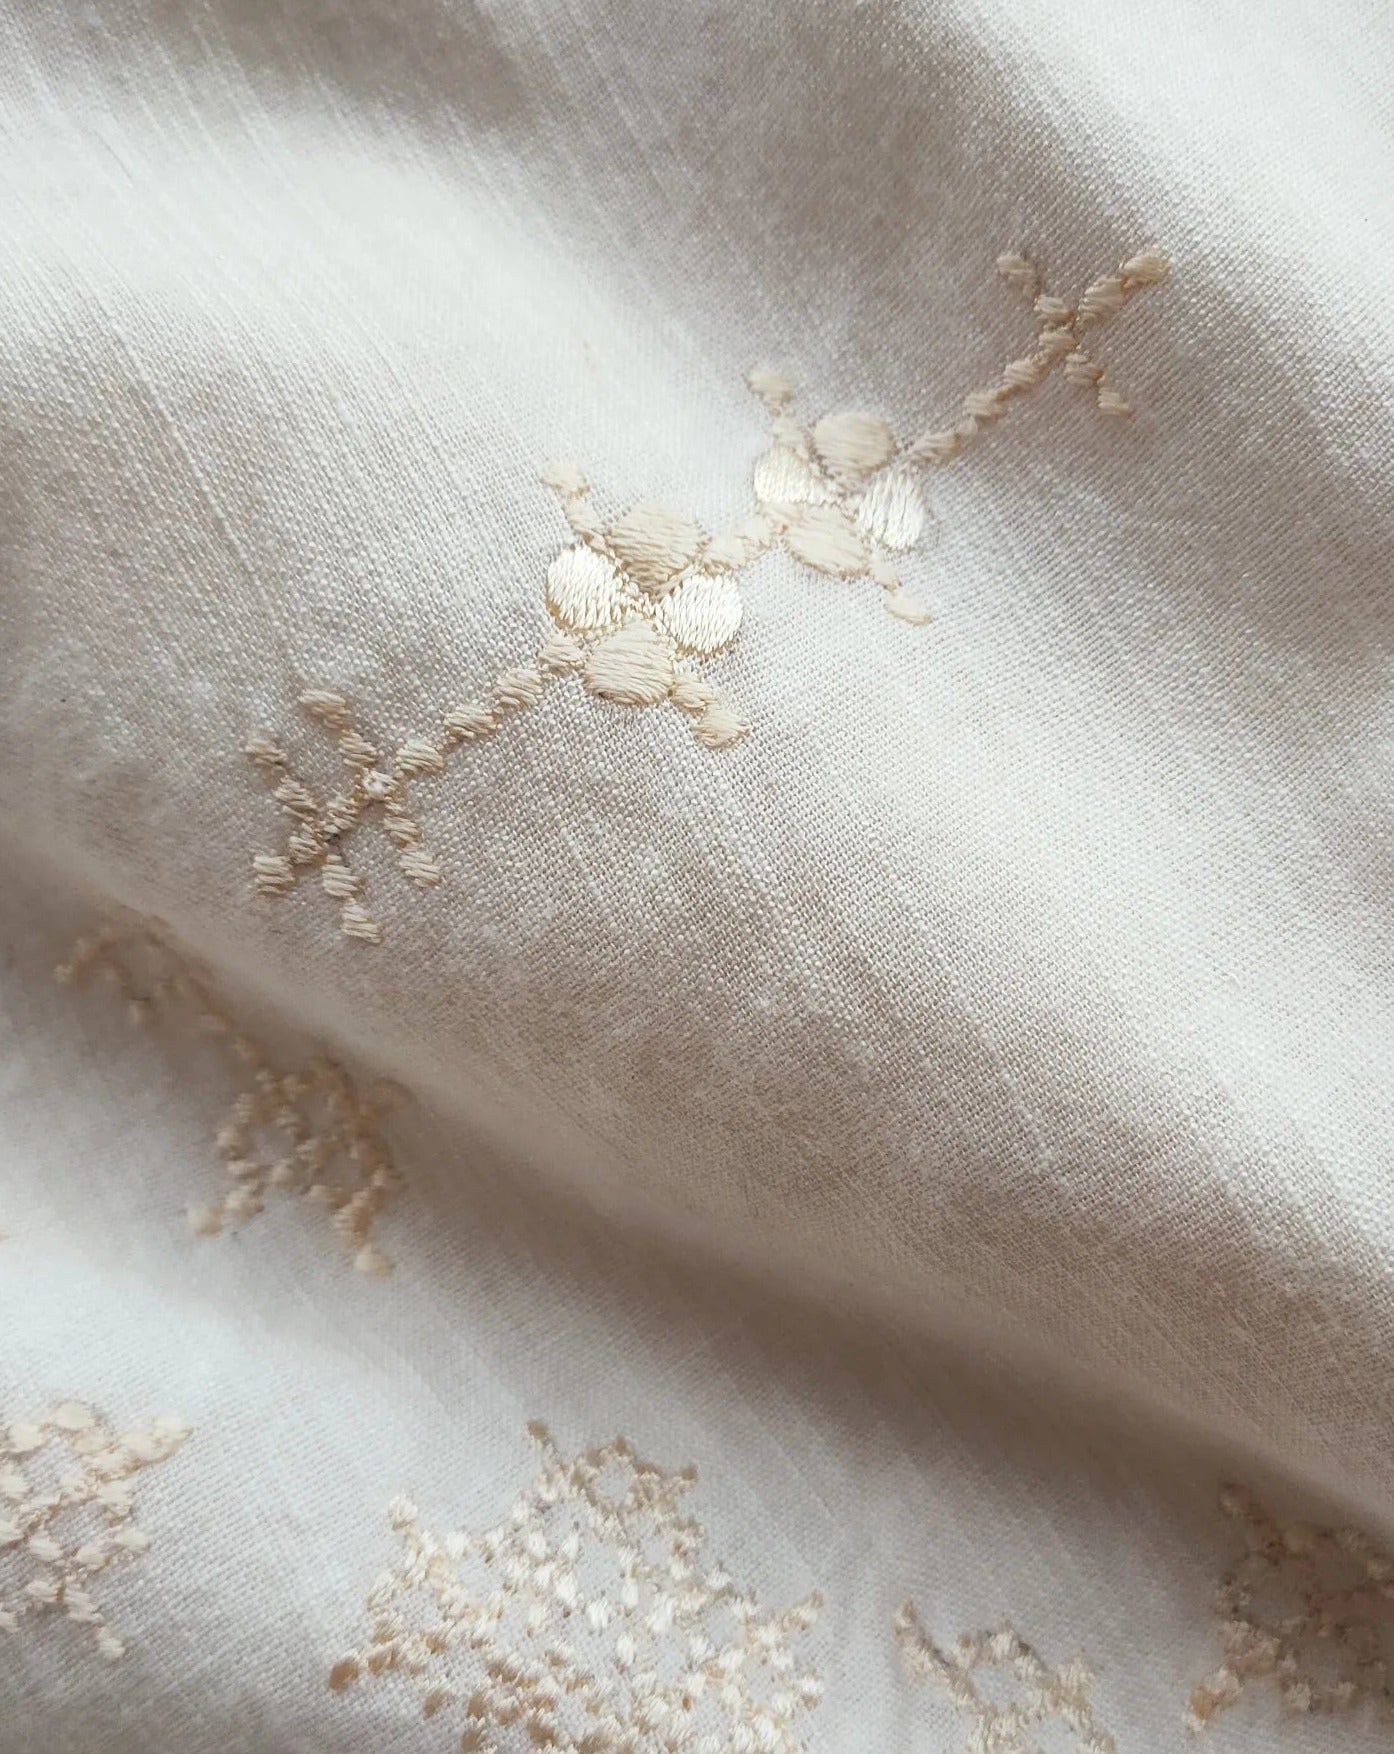 100% raw cotton, heirloom cotton, embroidery